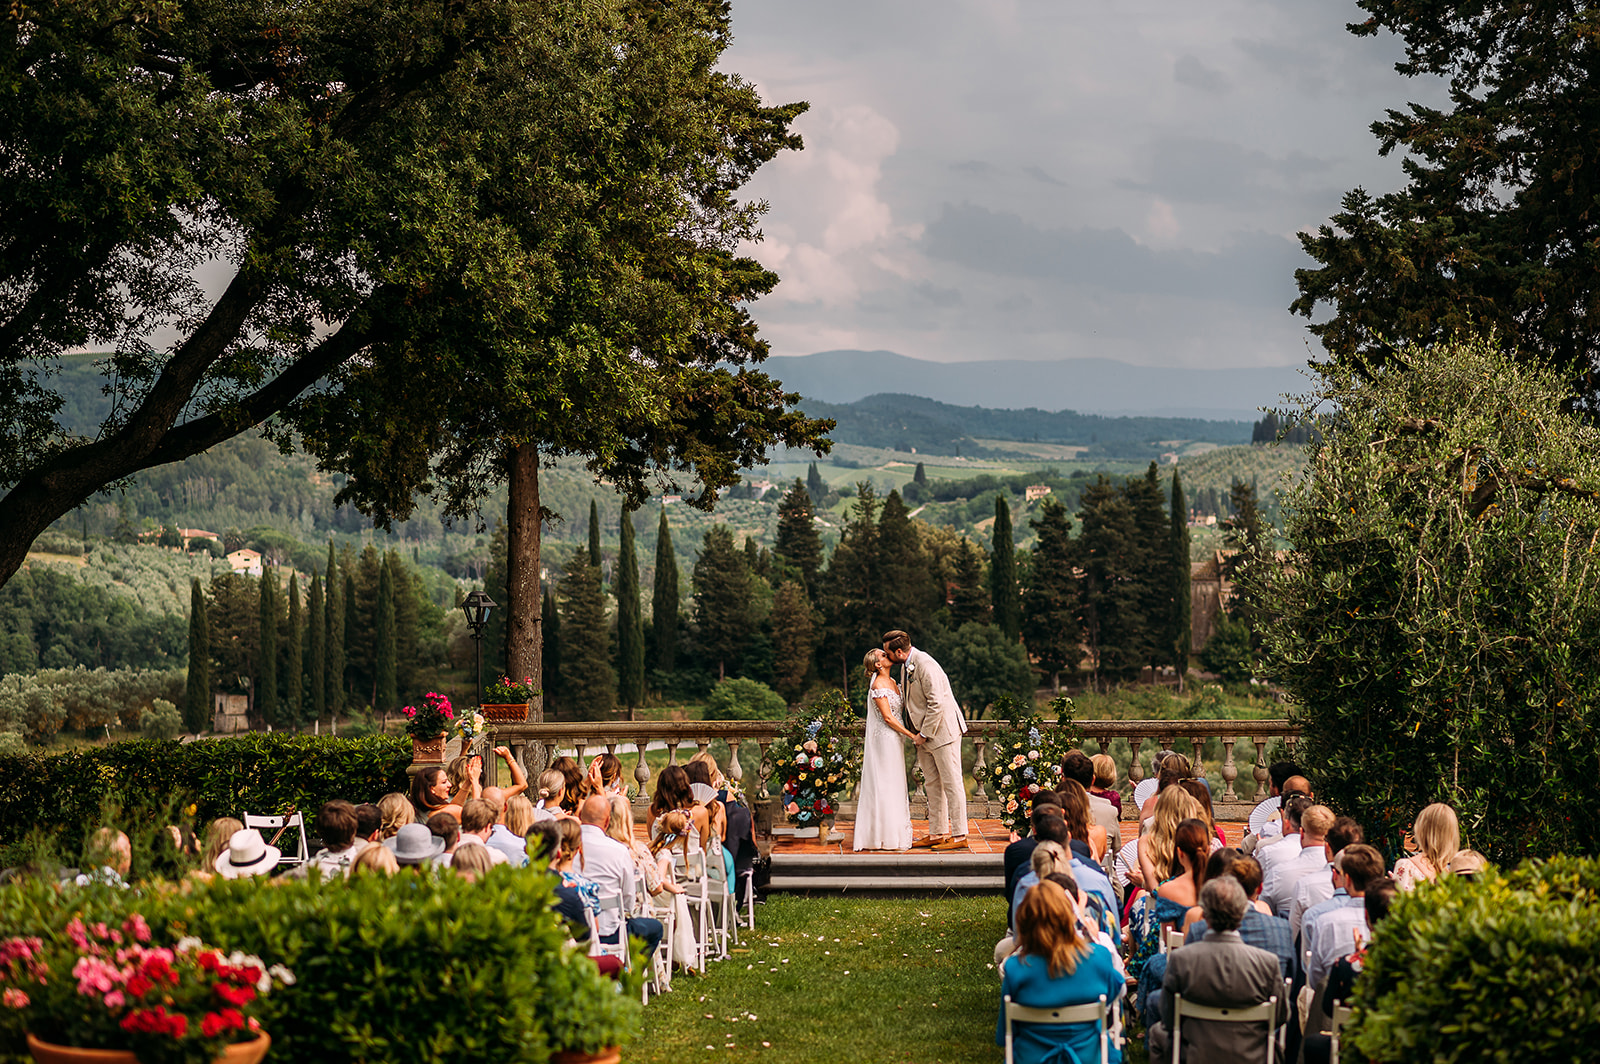 First kiss during the ceremony in Tuscany.